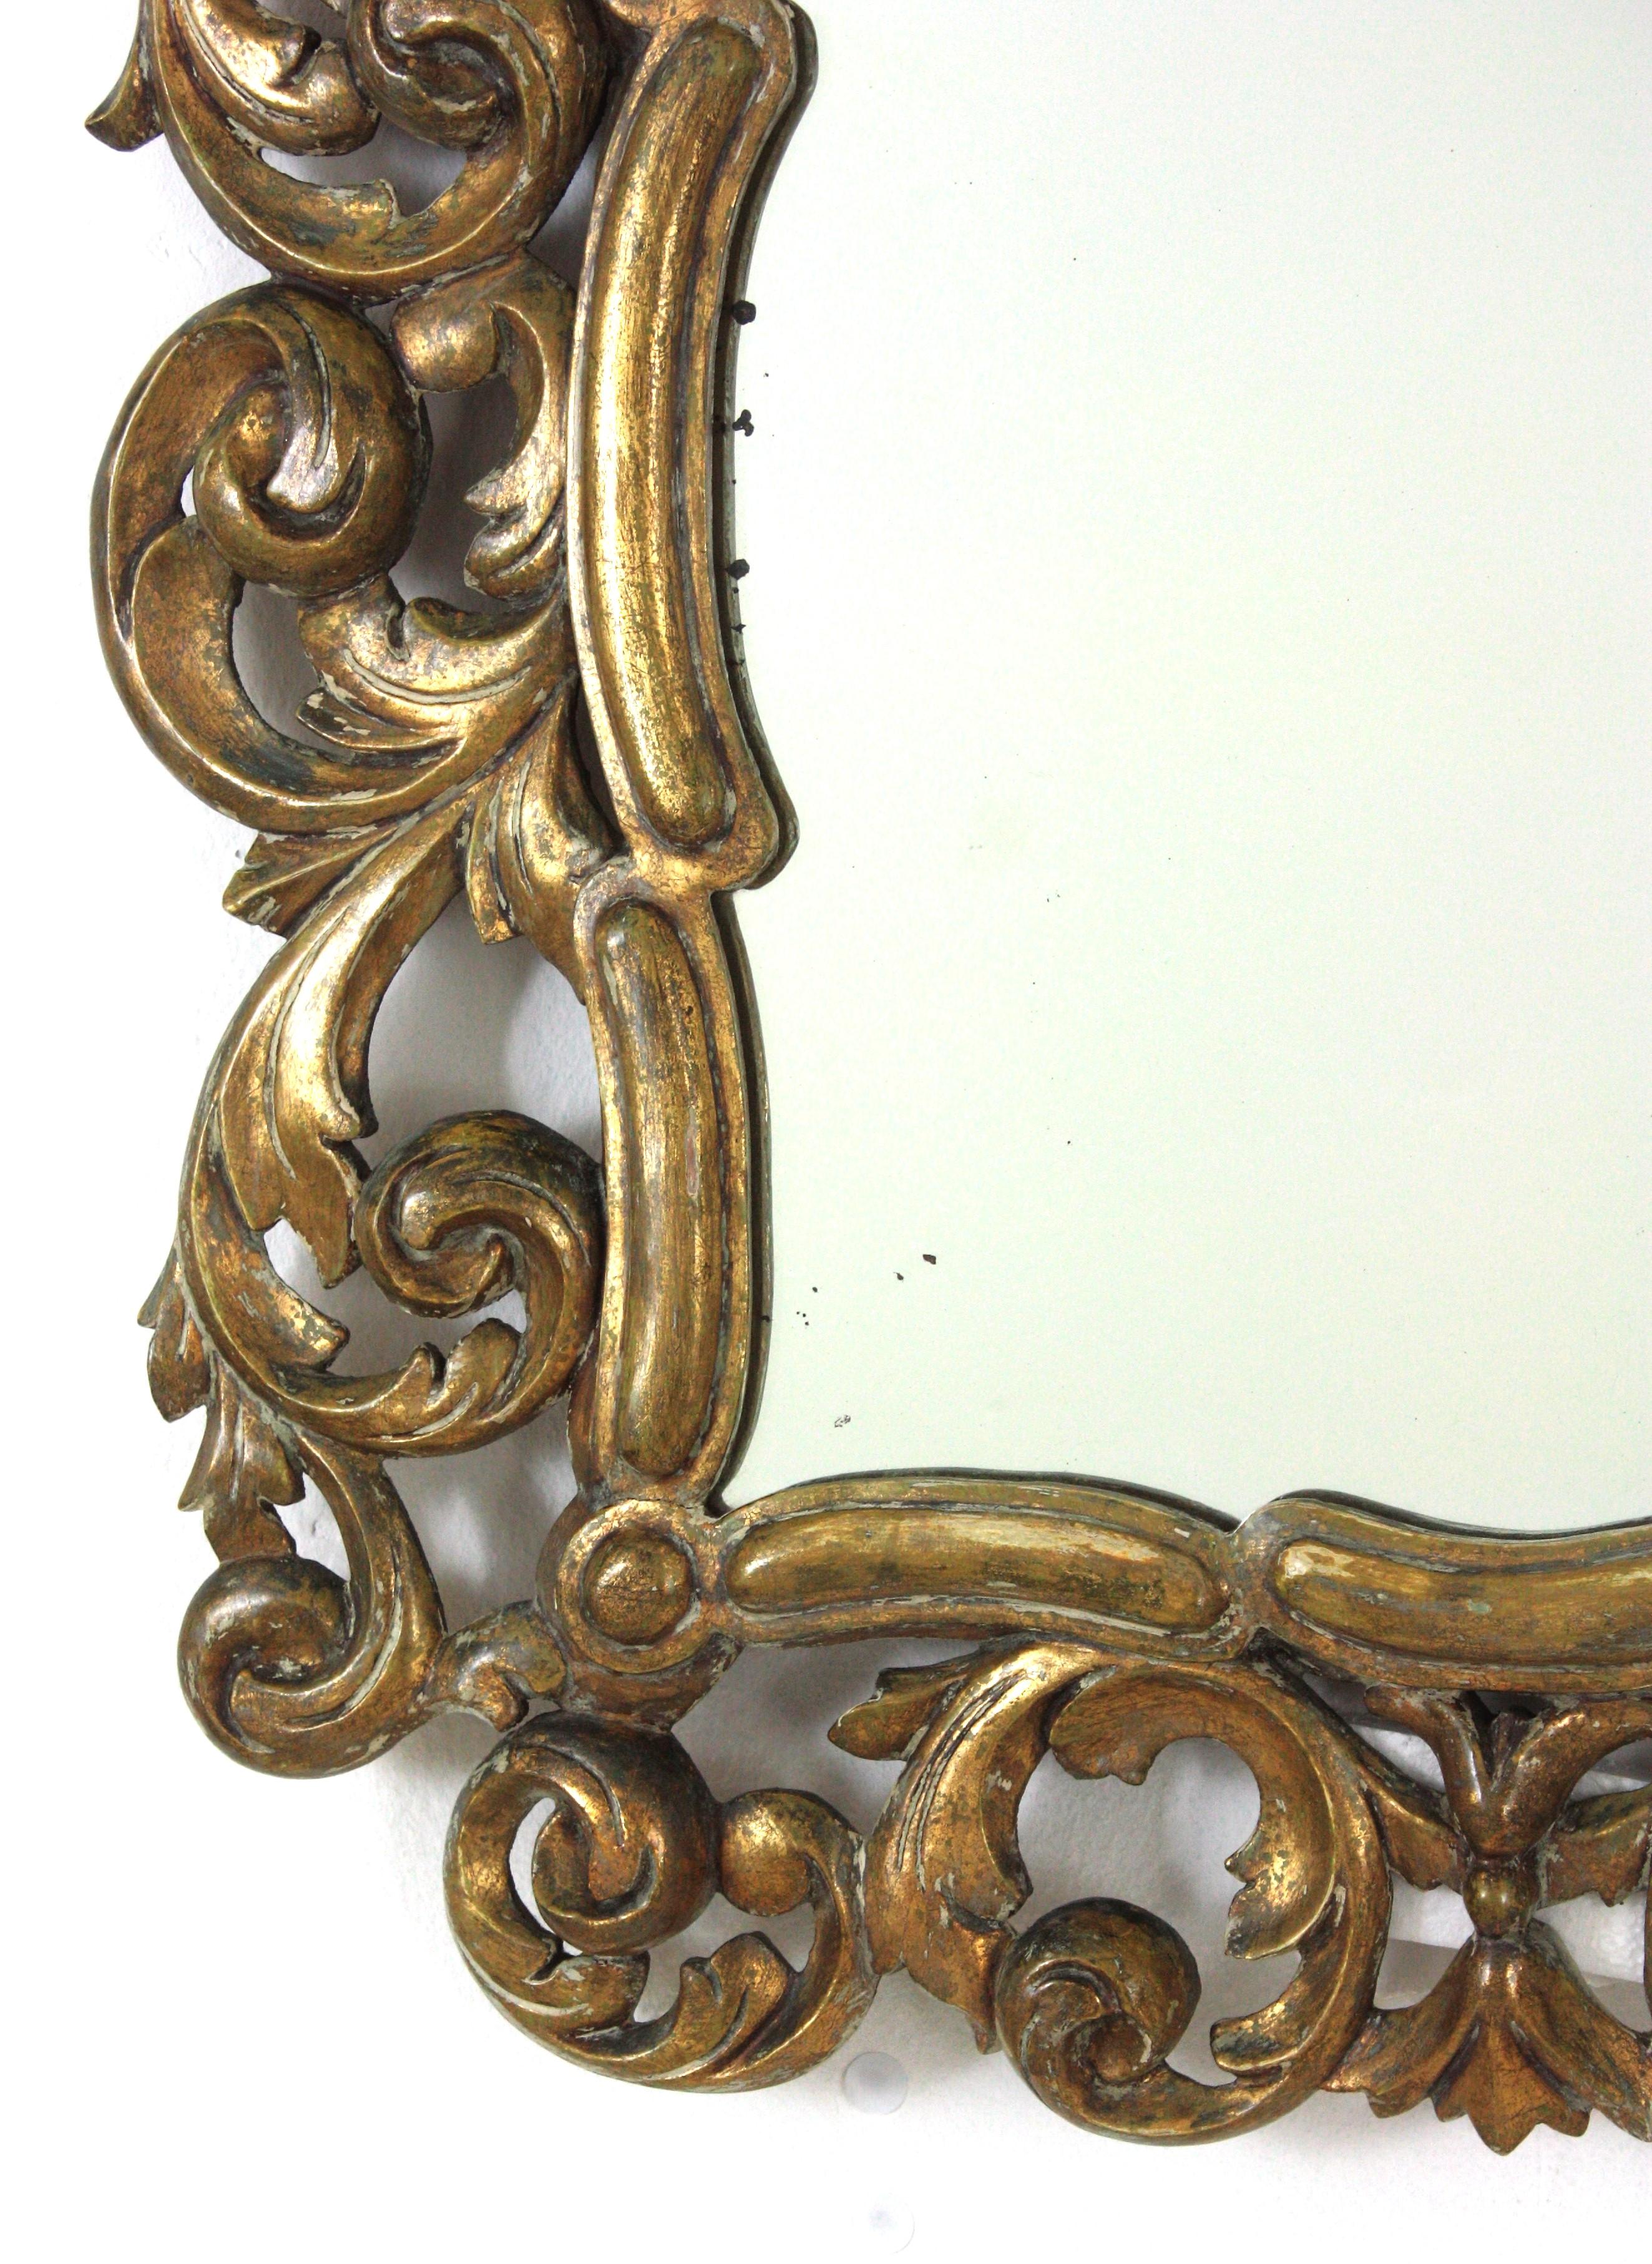 Rococo Spanish Foliage Gilt Carved Wood Mirror with Scroll Work Design For Sale